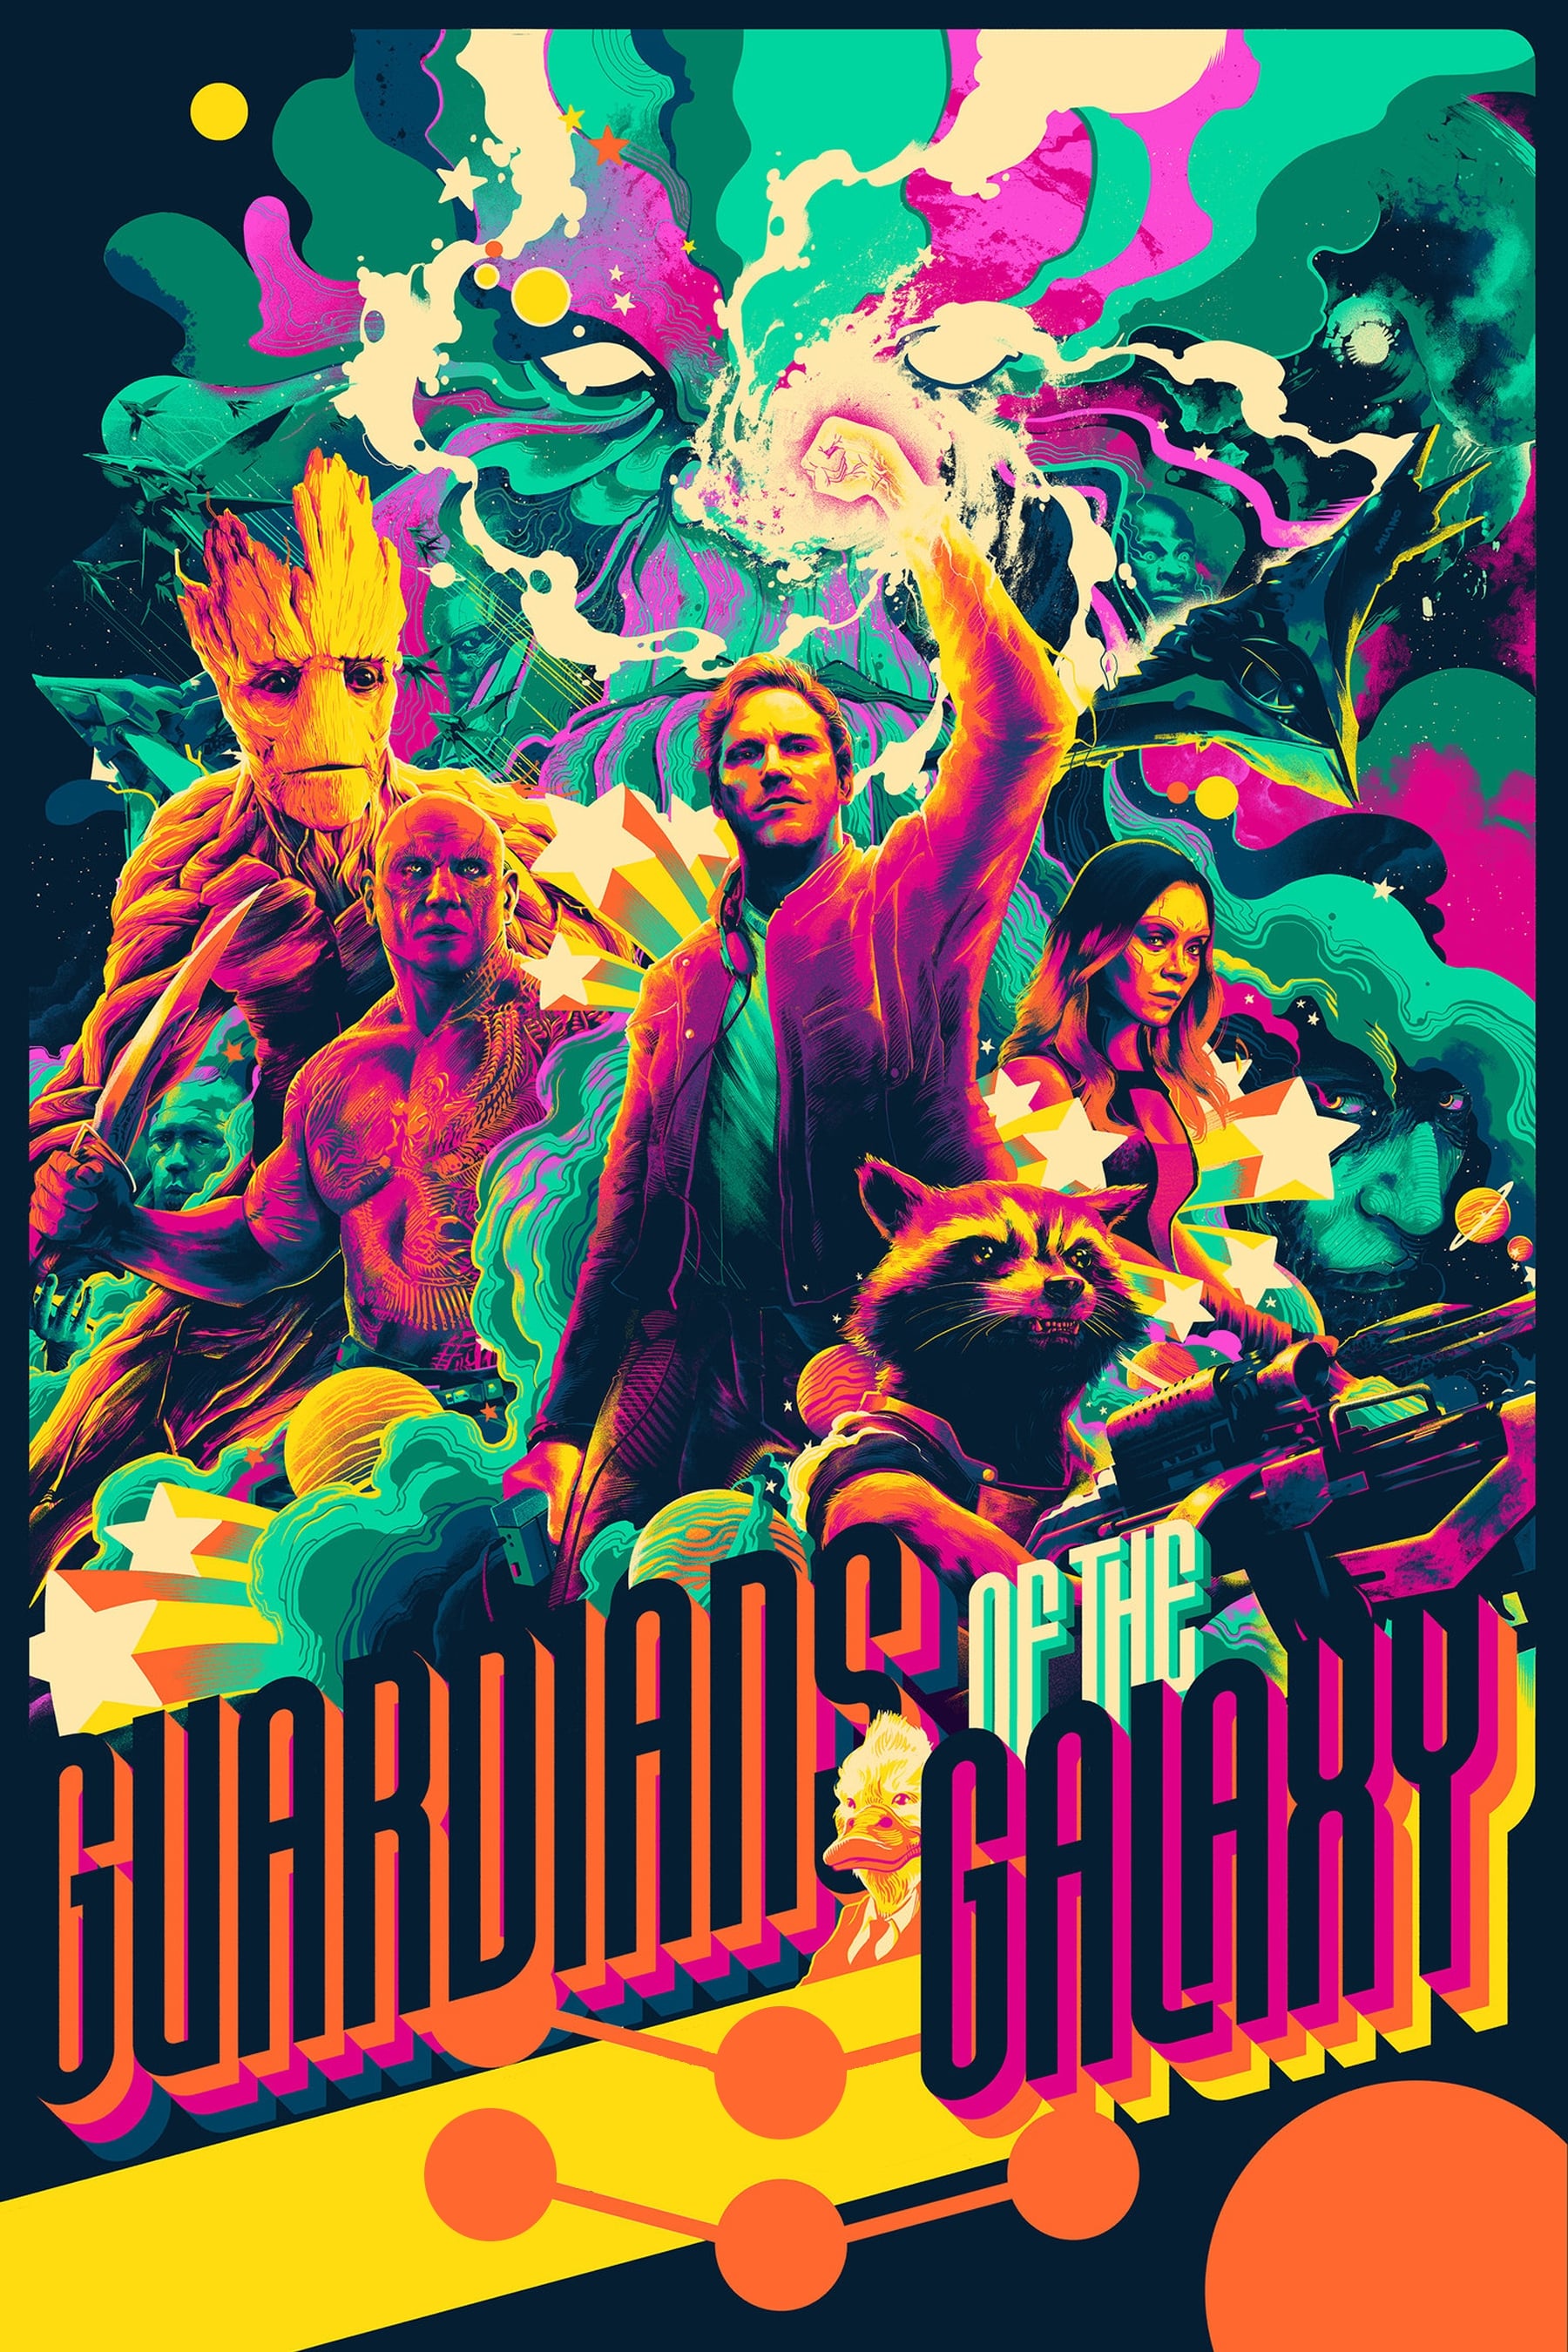 Guardians Of The Galaxy (2014) REMUX 4K HDR Latino – CMHDD